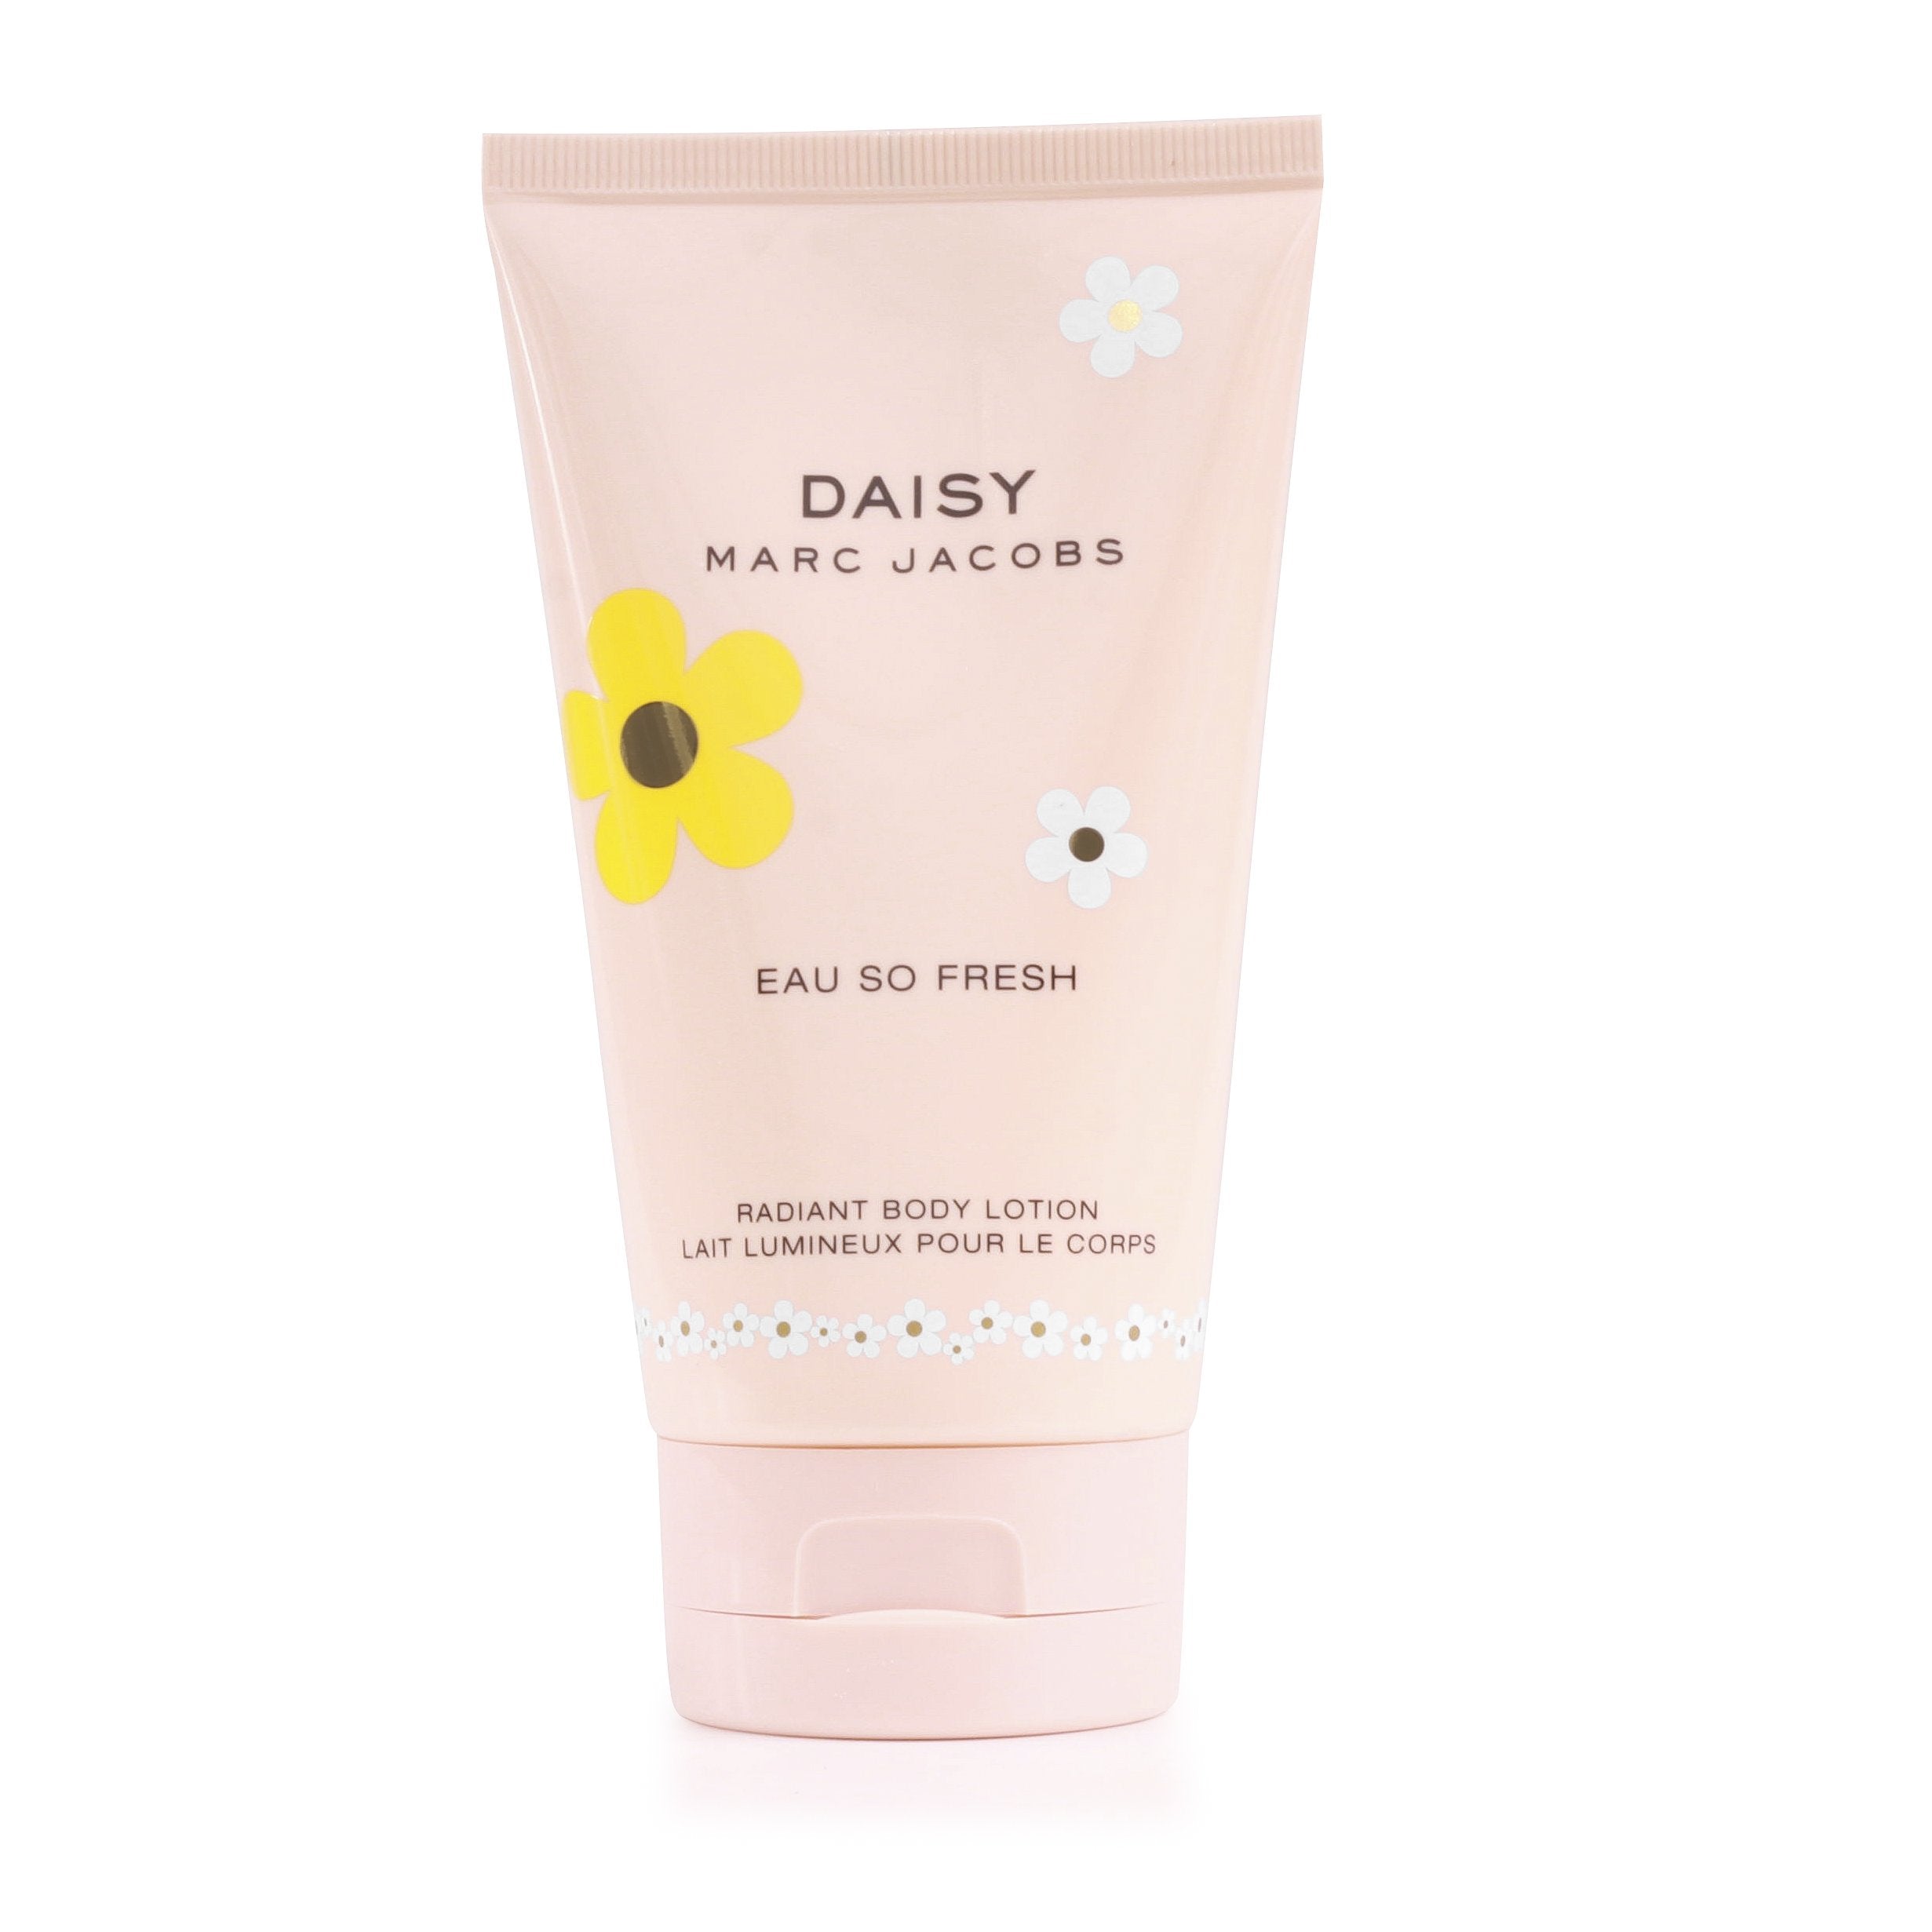 Inspektion Vend om band Daisy Eau So Fresh Body Lotion for Women by Marc Jacobs – Fragrance Outlet